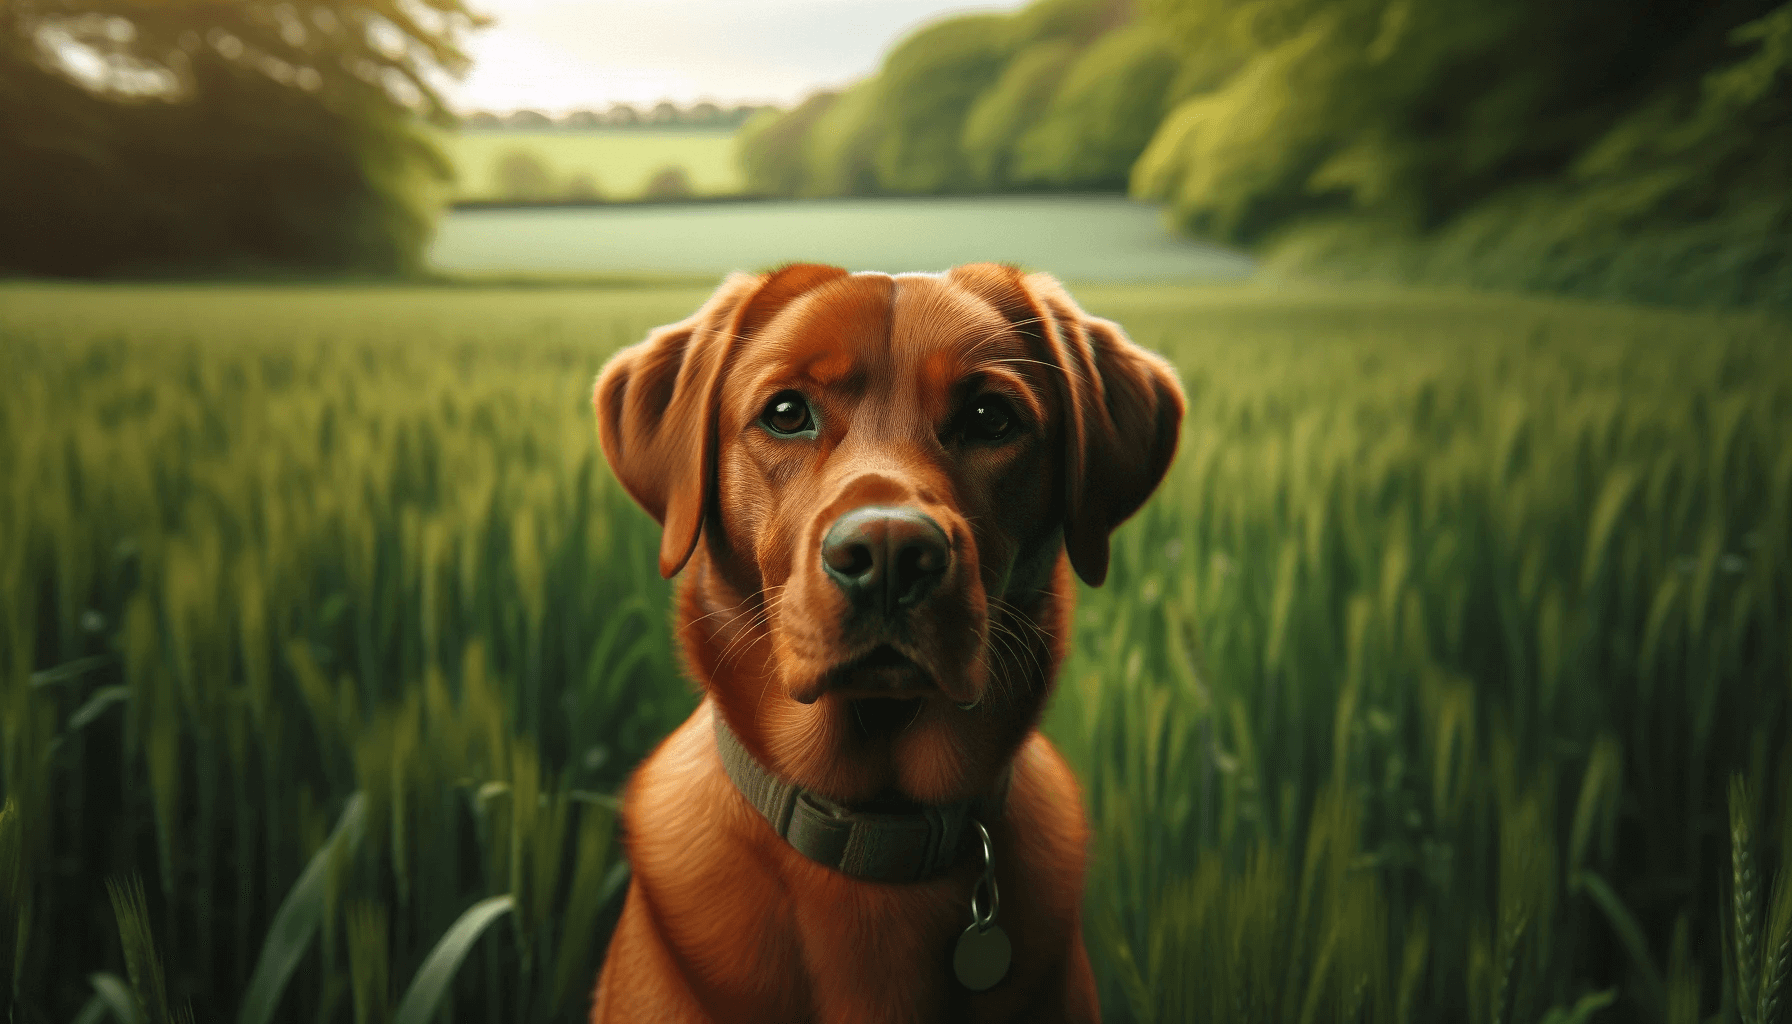 A Red Fox Labrador Retriever standing in a lush green field. The dog has a glossy reddish-brown coat with intelligent expressive eyes.